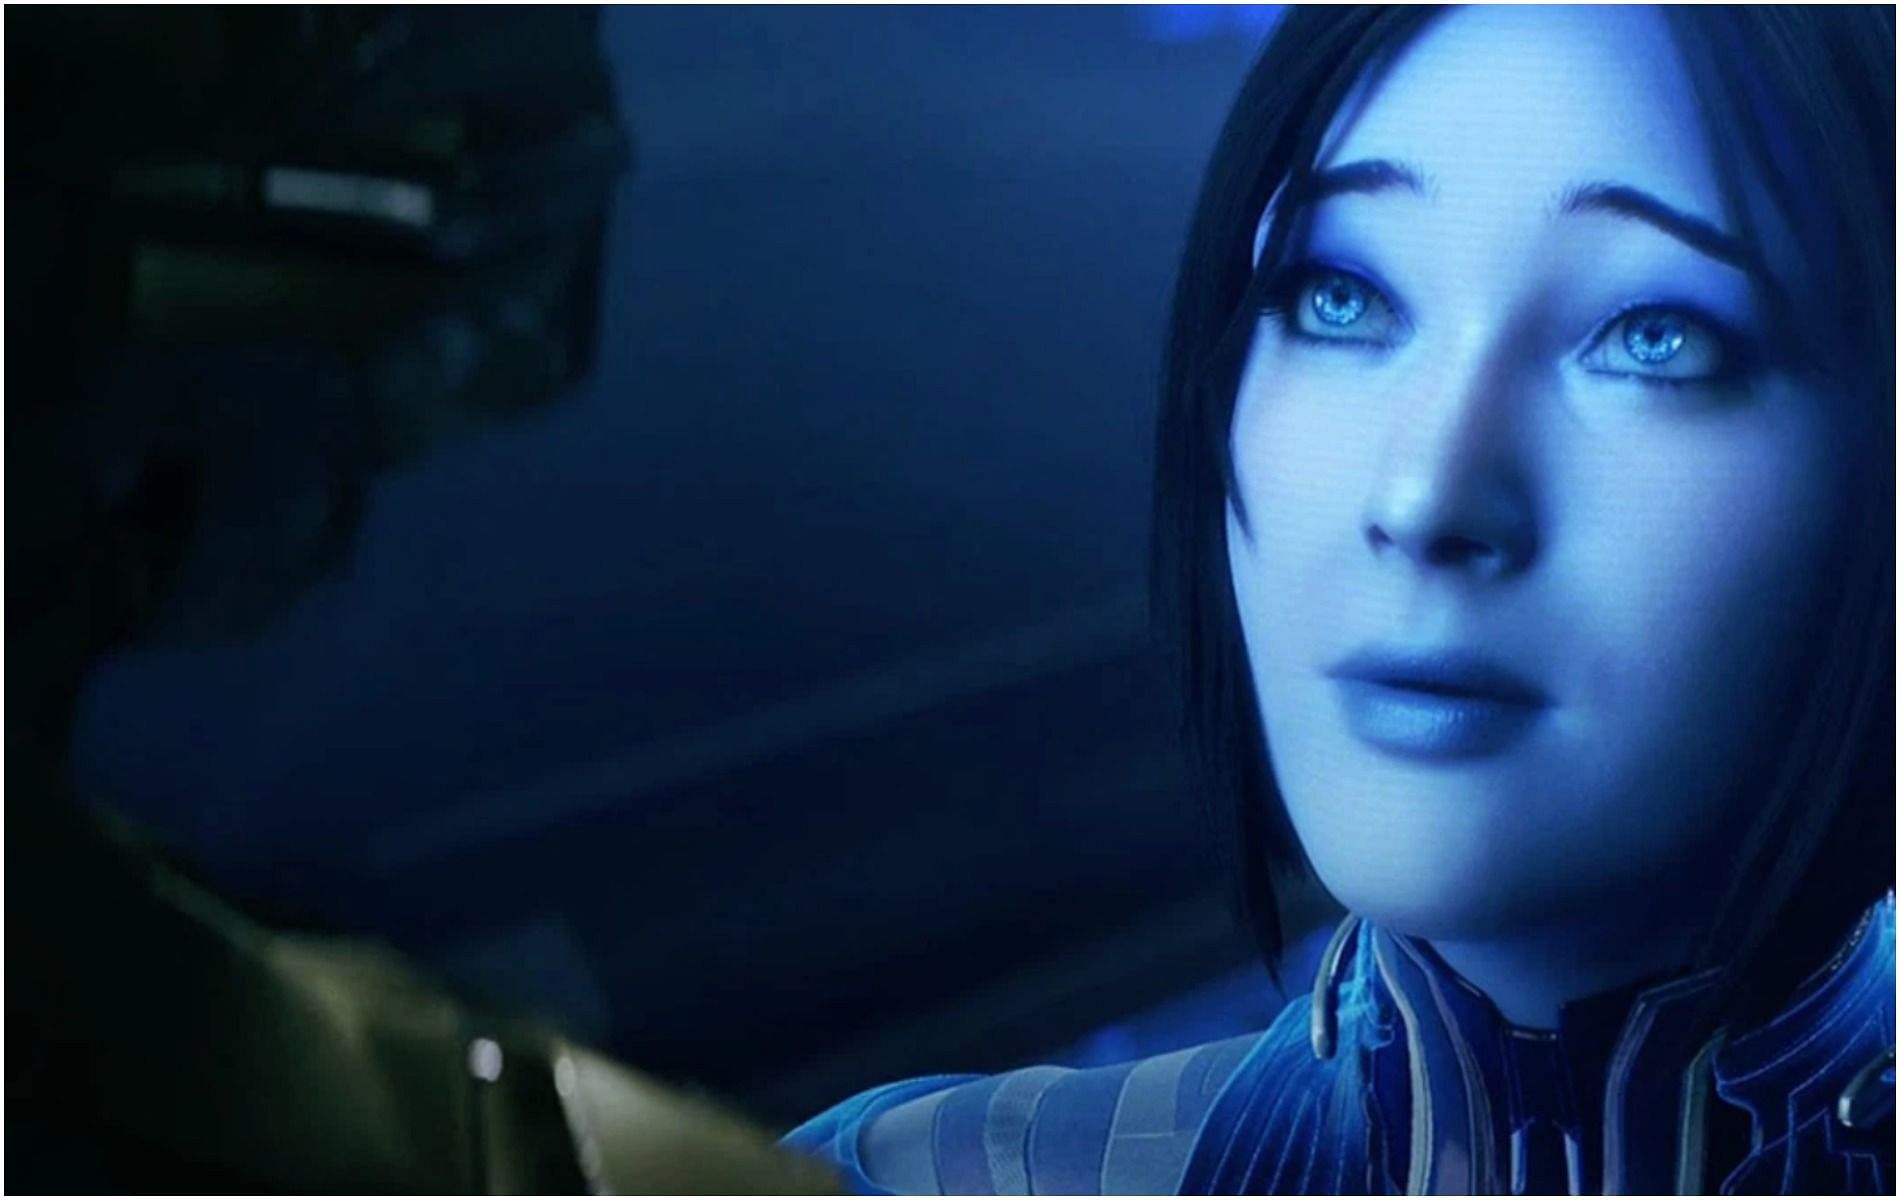 Cortana looks upon Master Chief for the first time in Halo 5 (Image via 343 Industries)